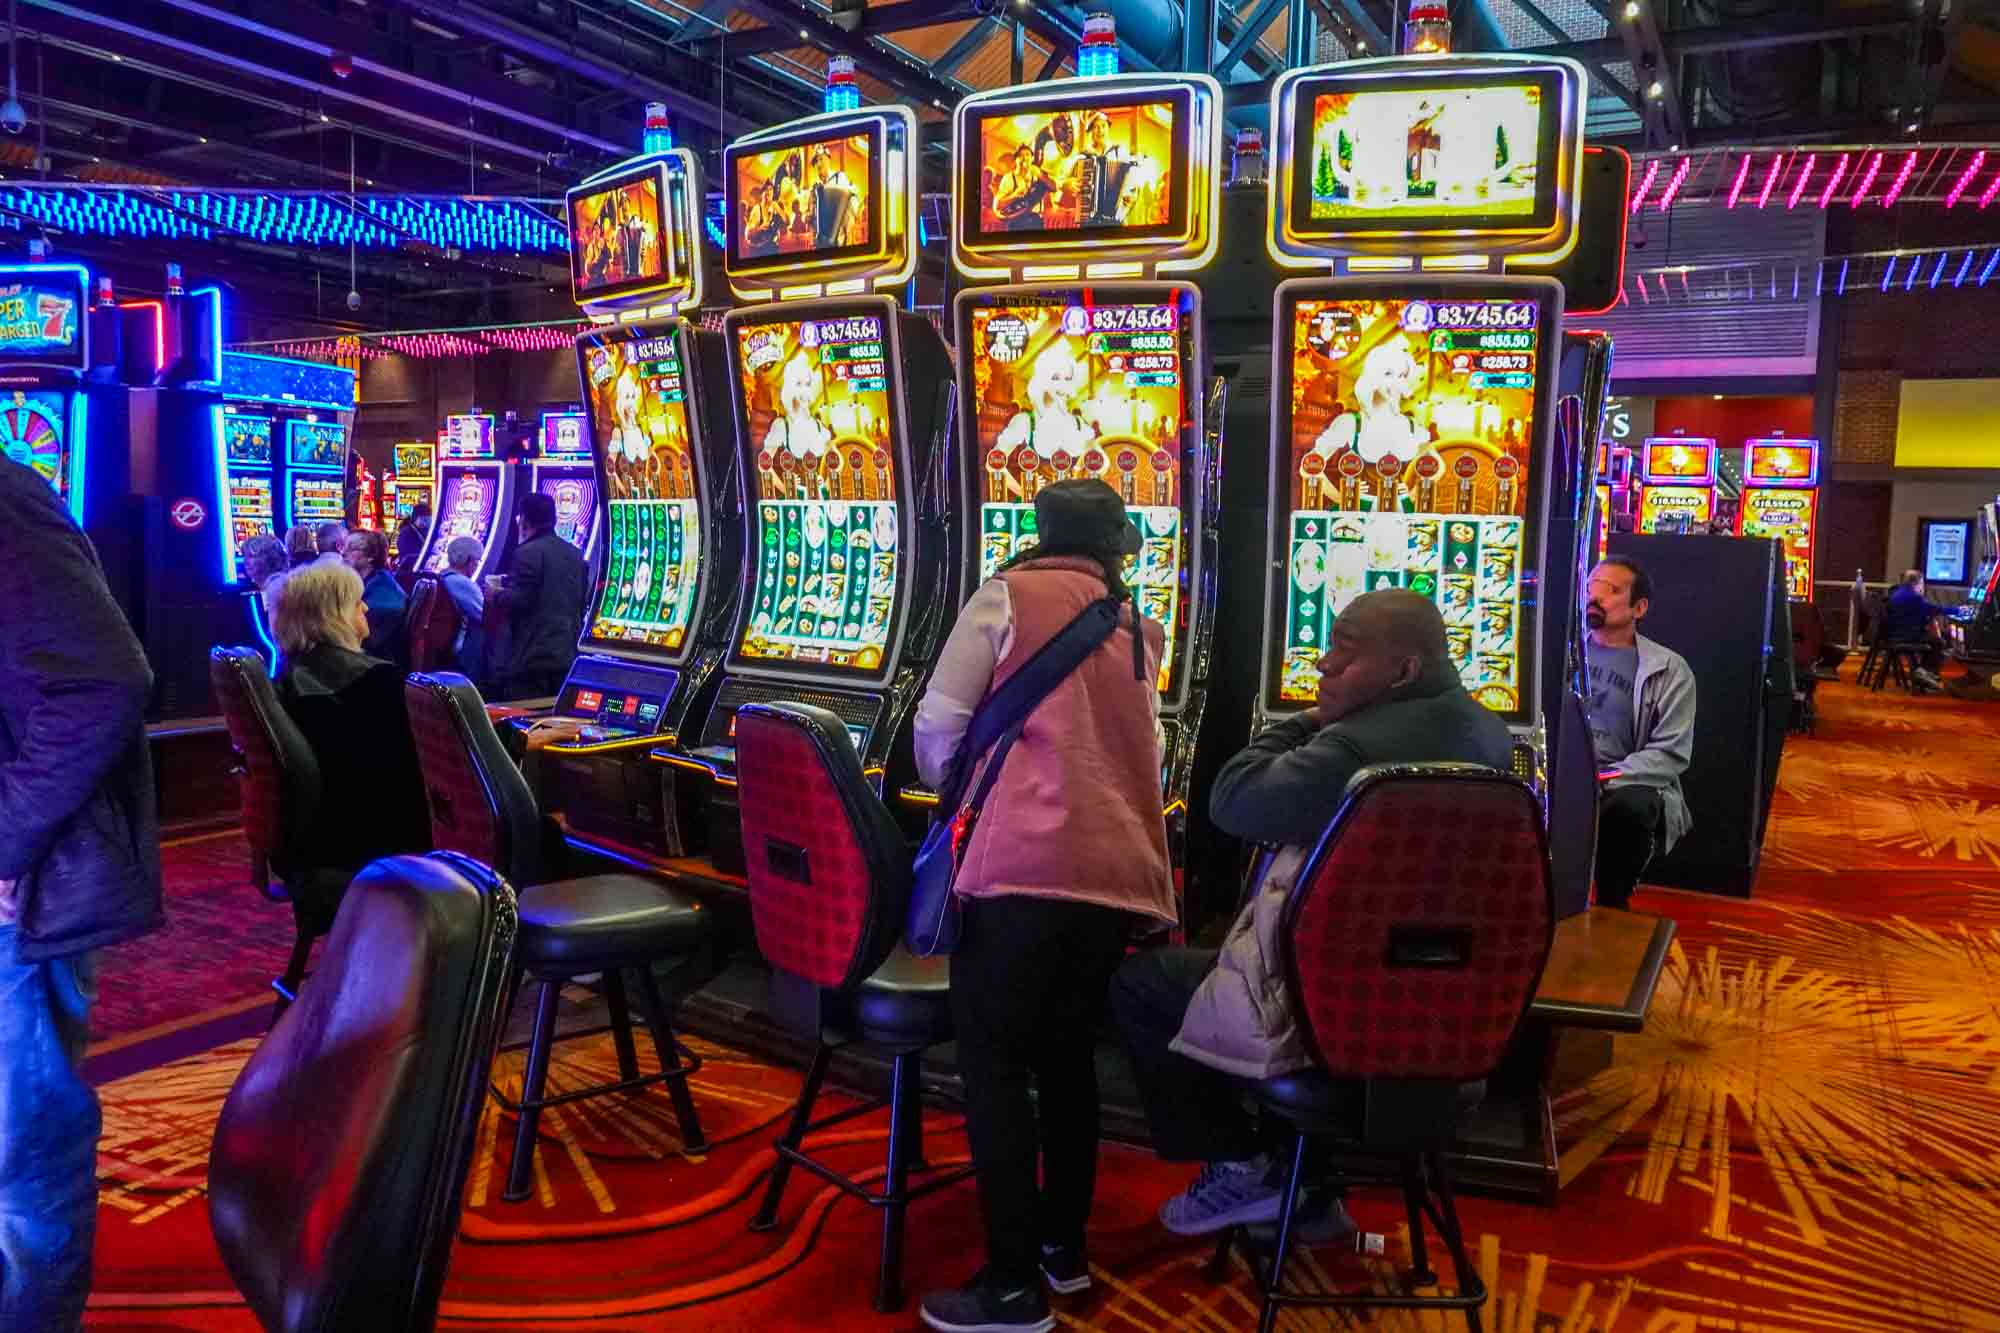 People seated at slot machines in a casino.